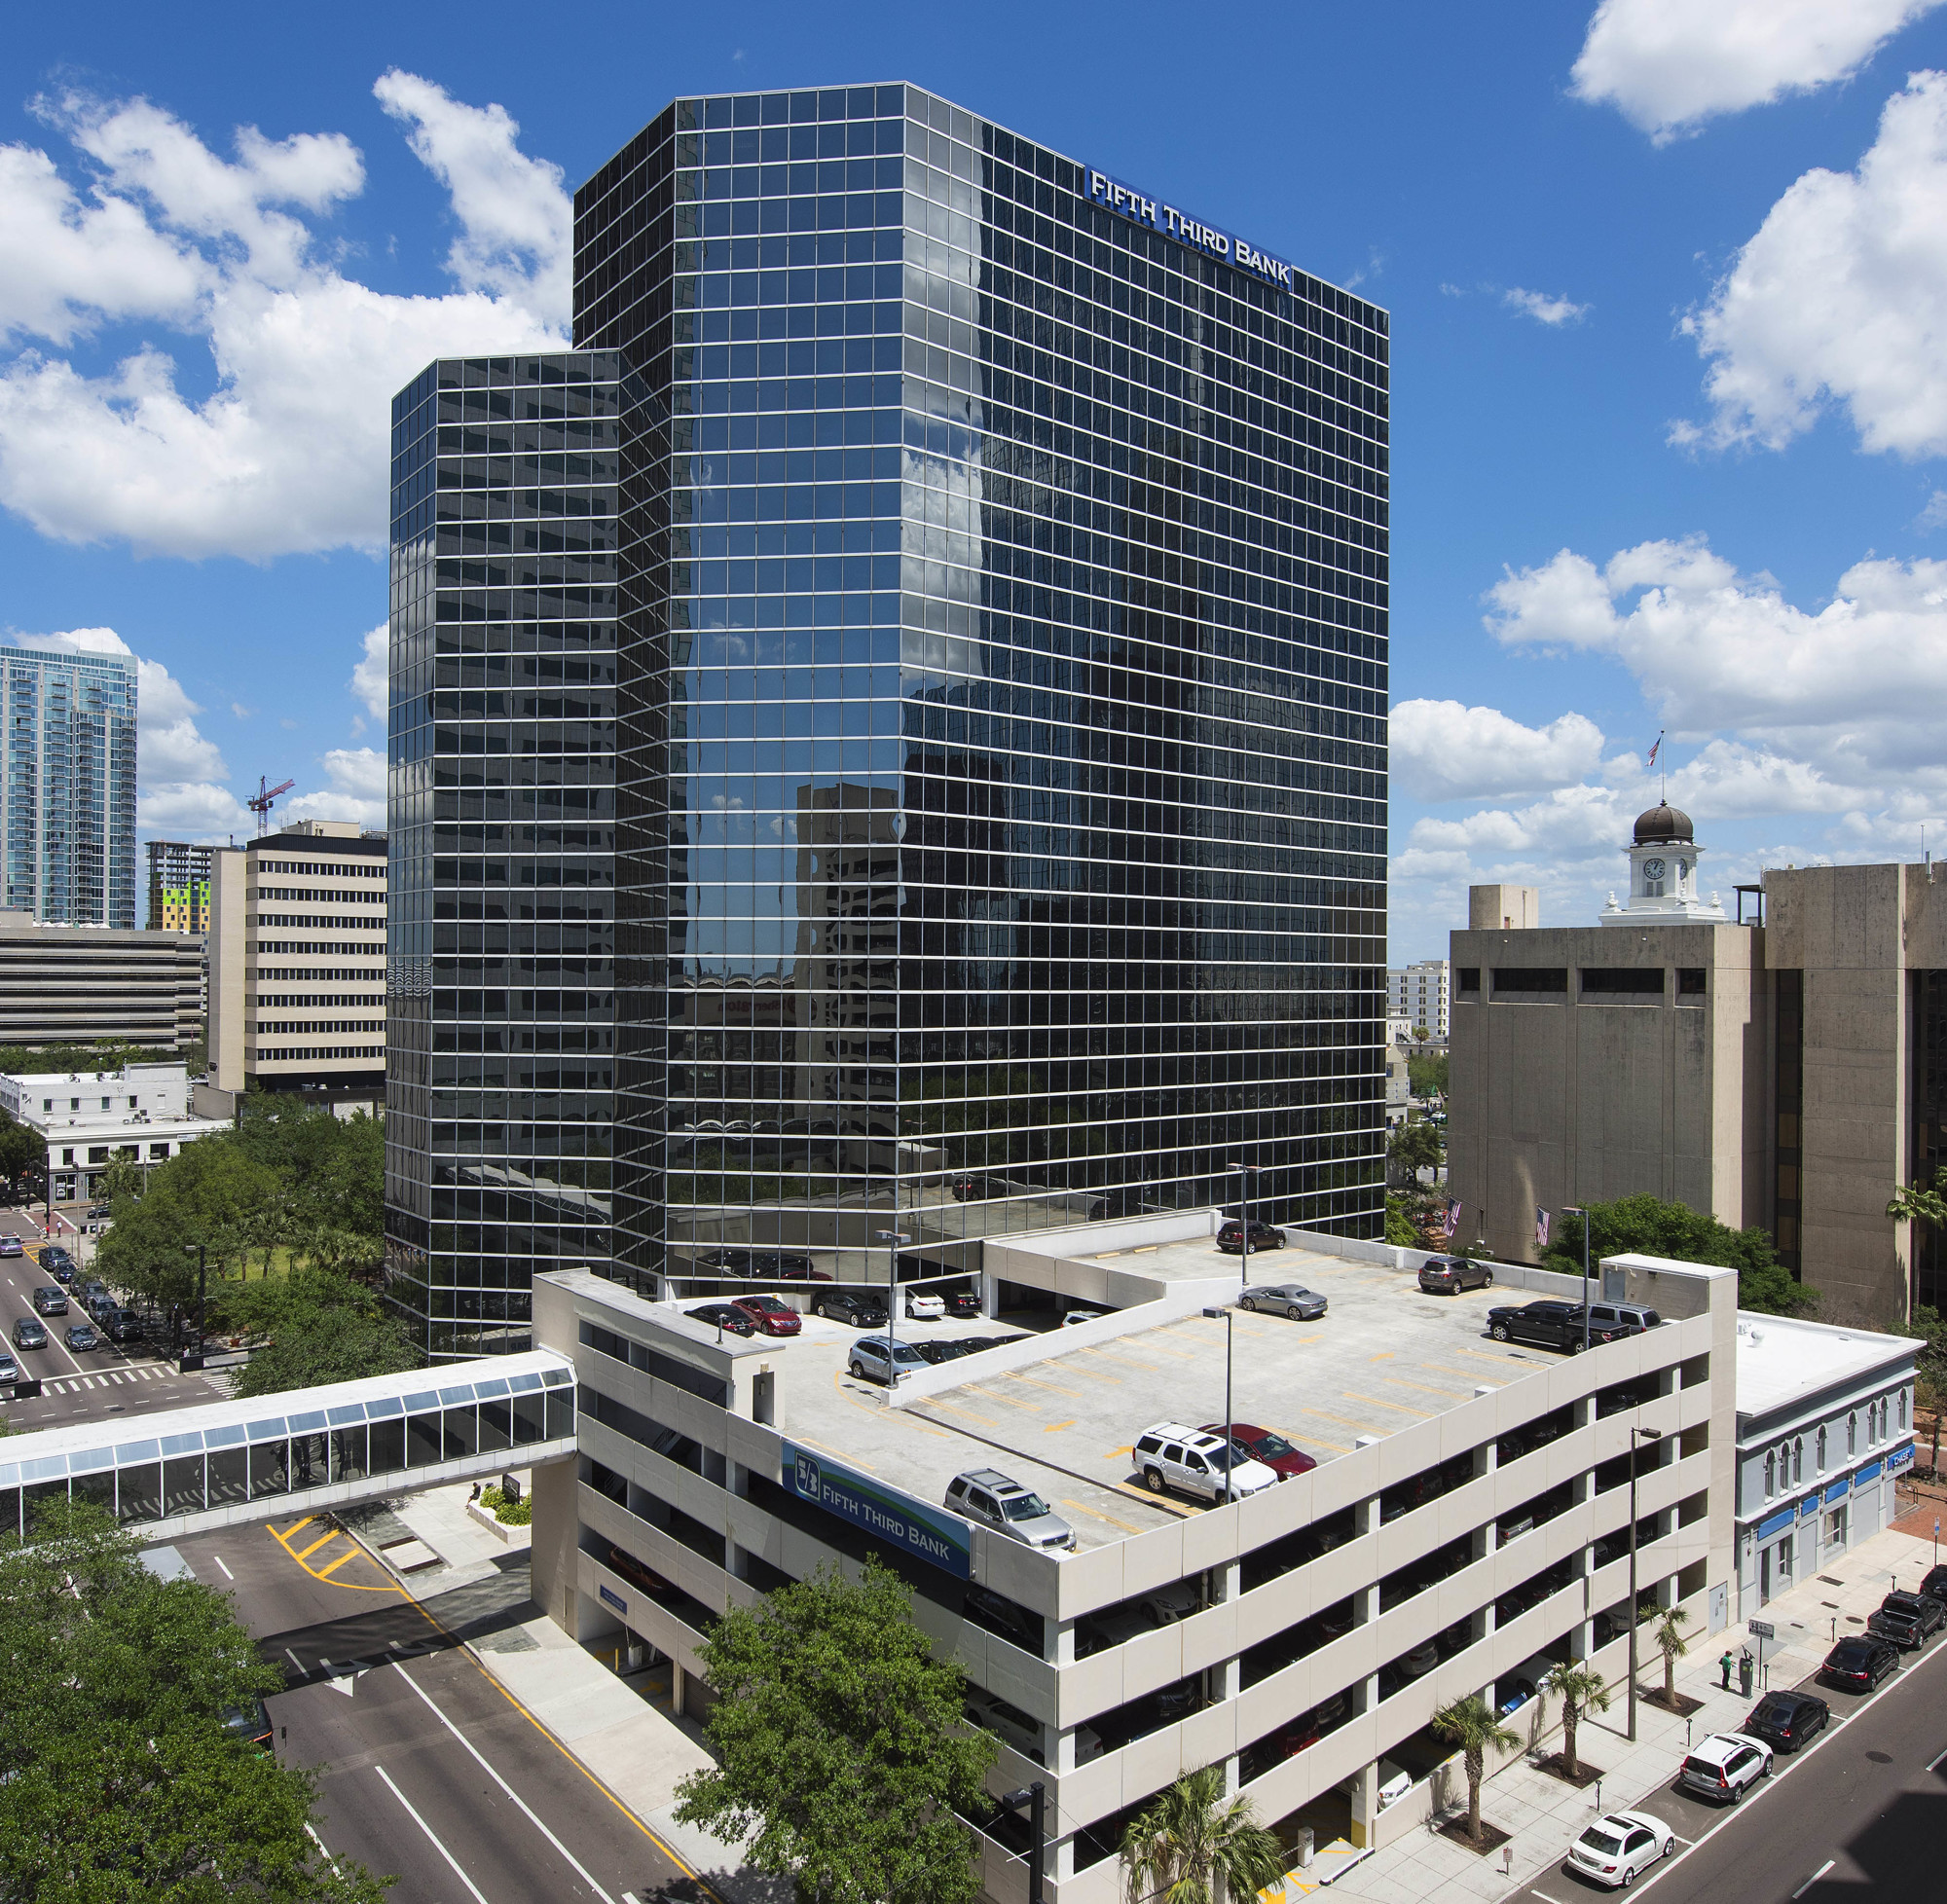 COURTESY PHOTO — Fifth Third Center owner Farley White Interests is spending more than $3 million to upgrade Fifth Third Center in downtown Tampa.